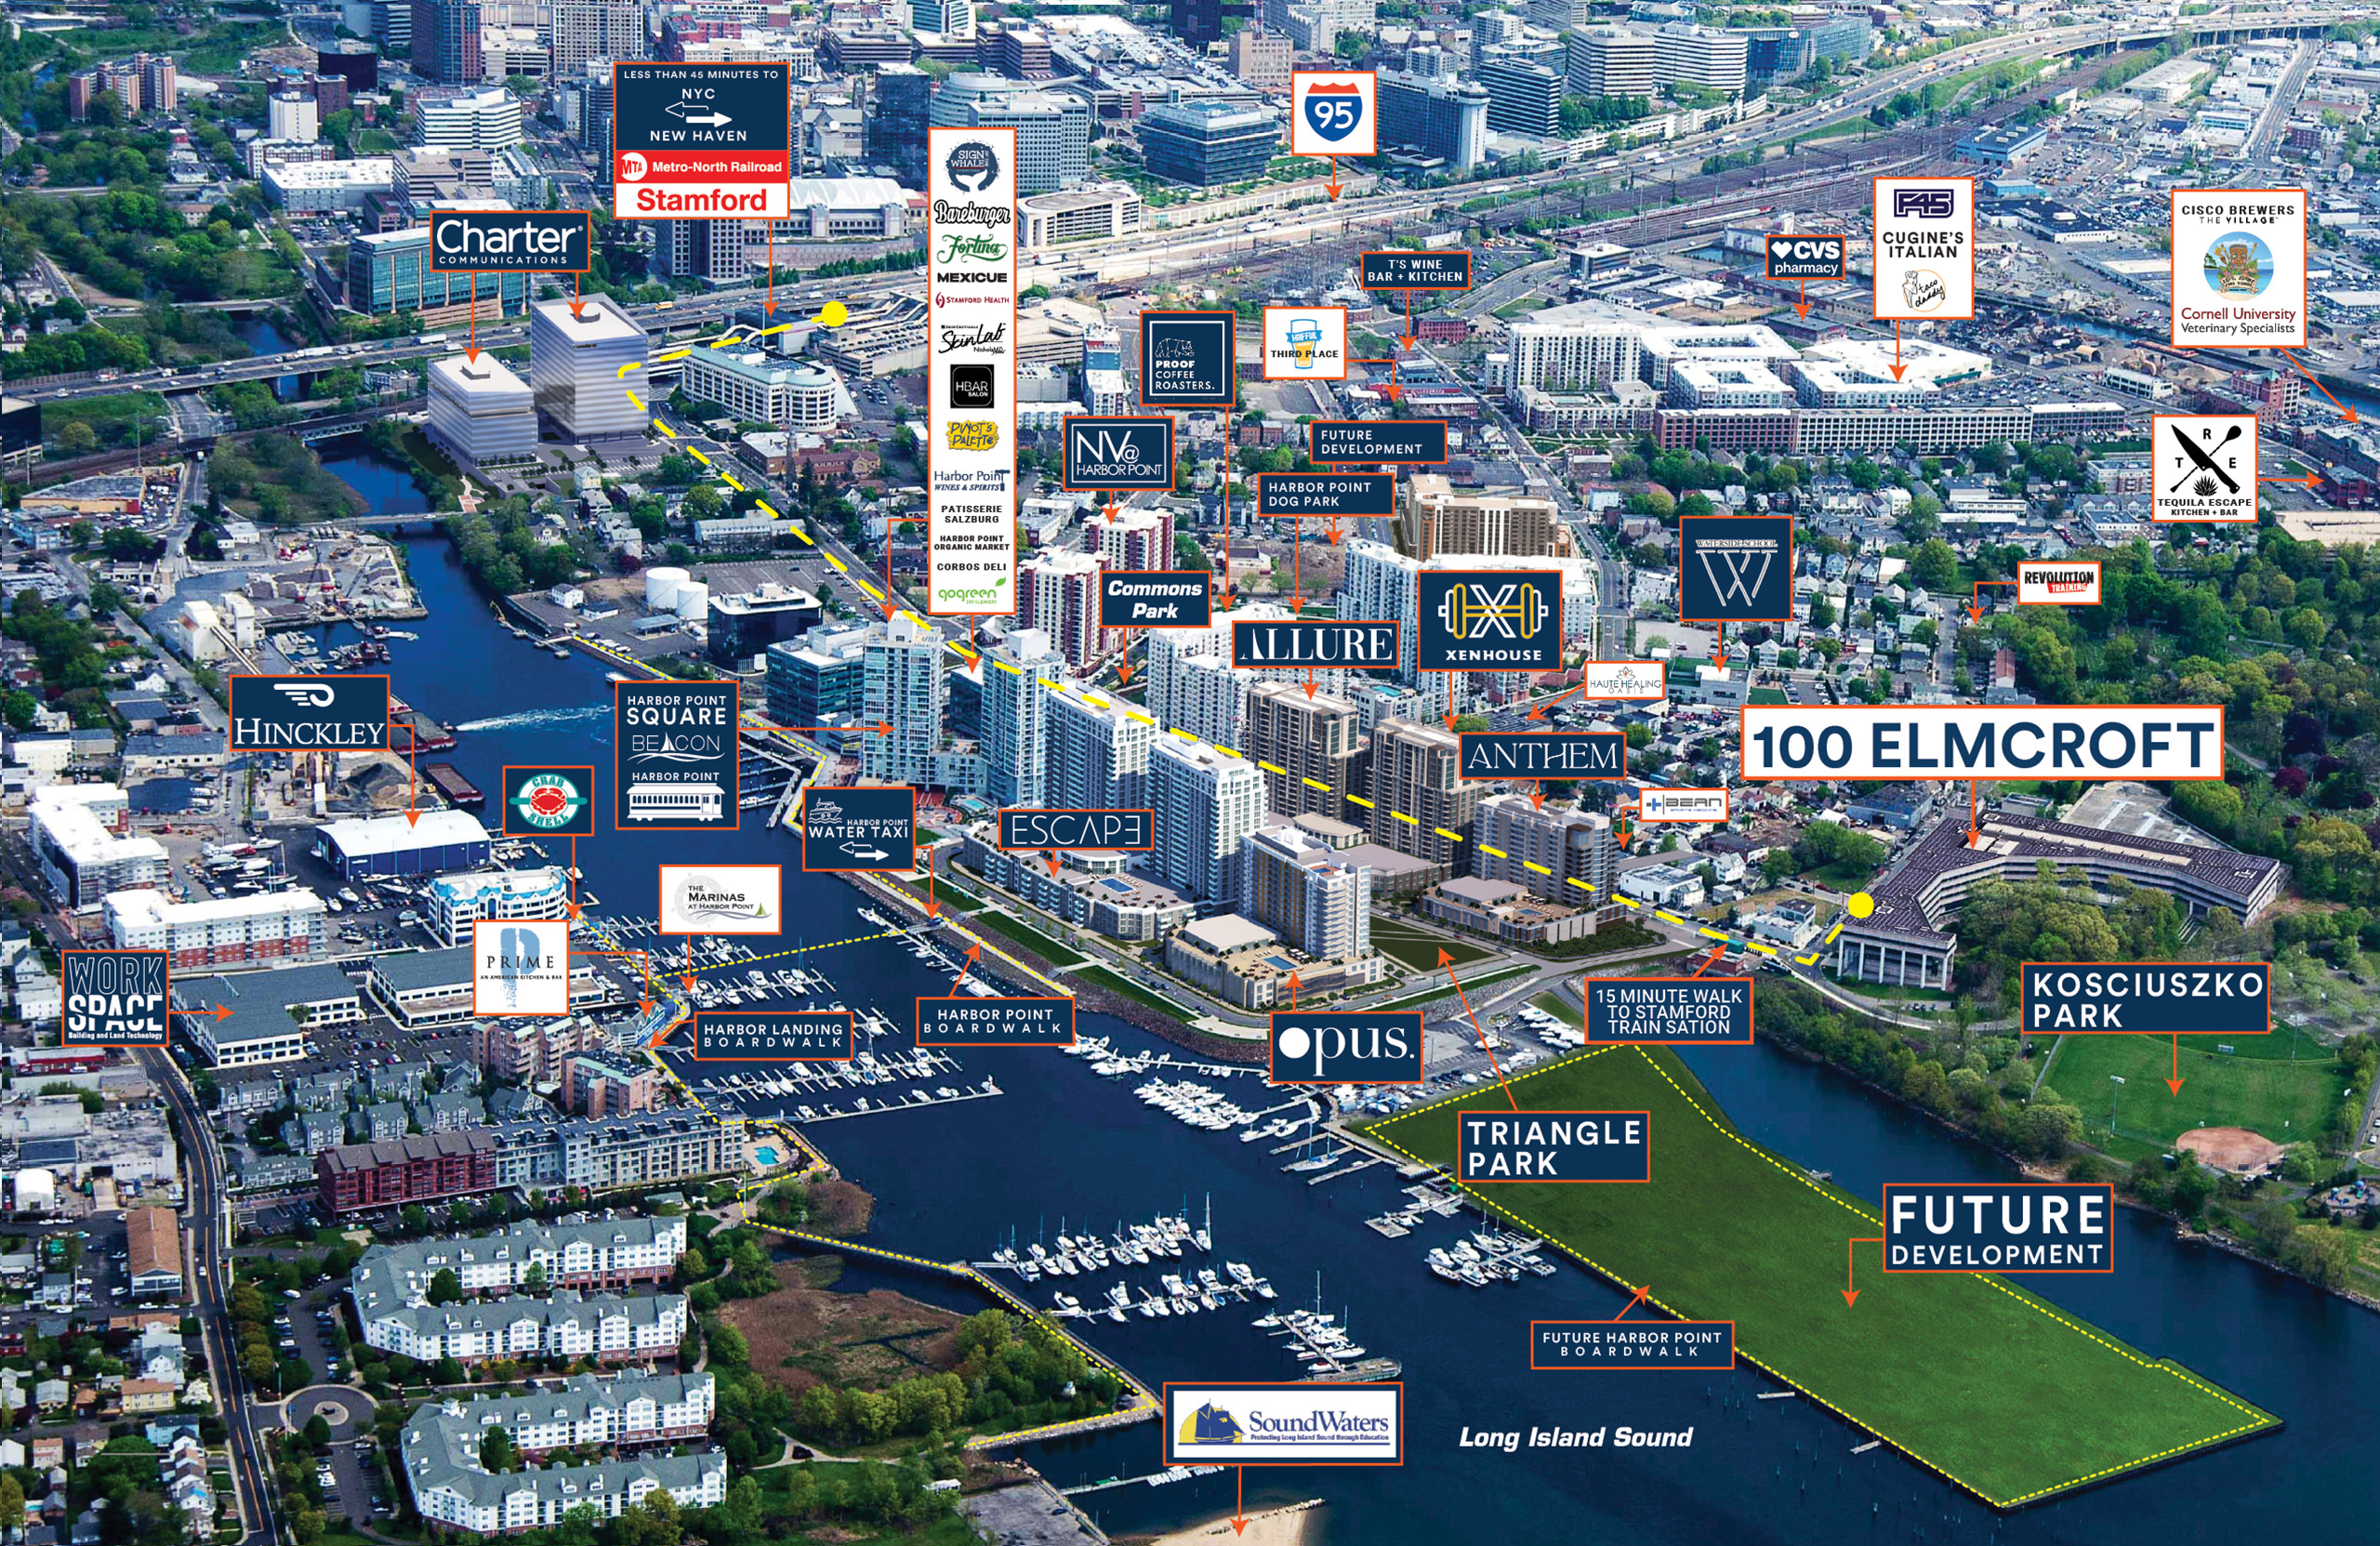 Current and future developments in surrounding areas of Harbor Point